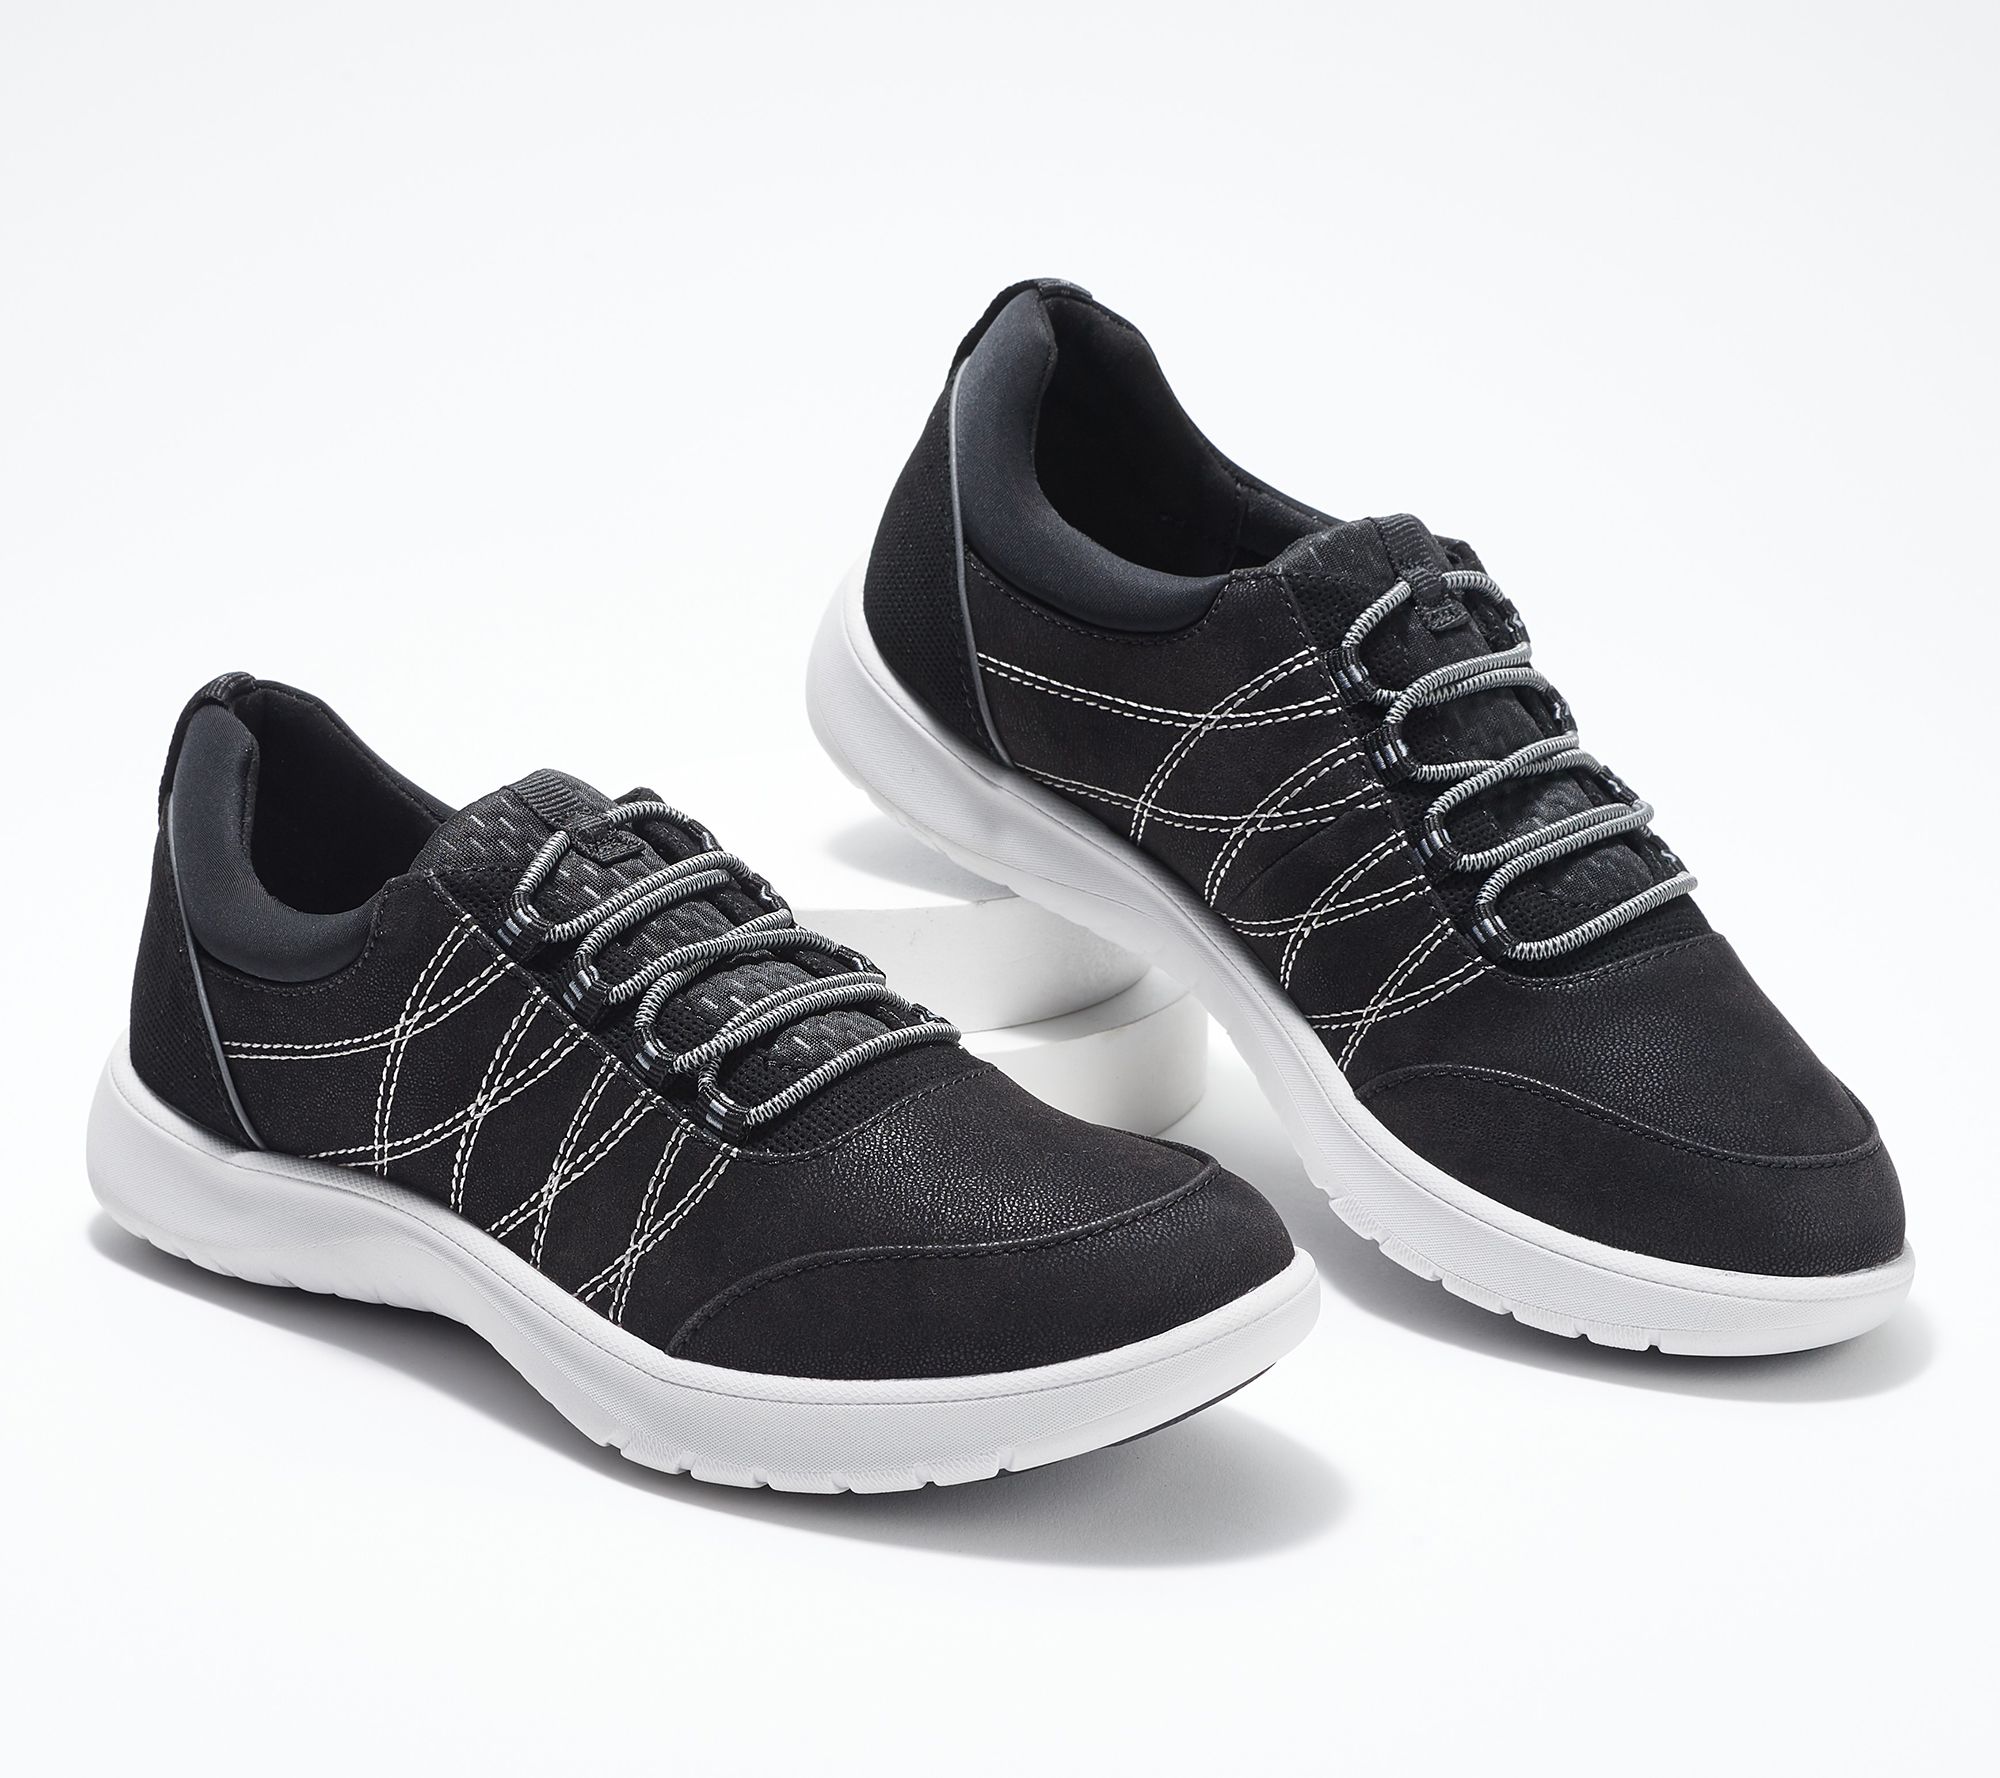 qvc sneakers on sale